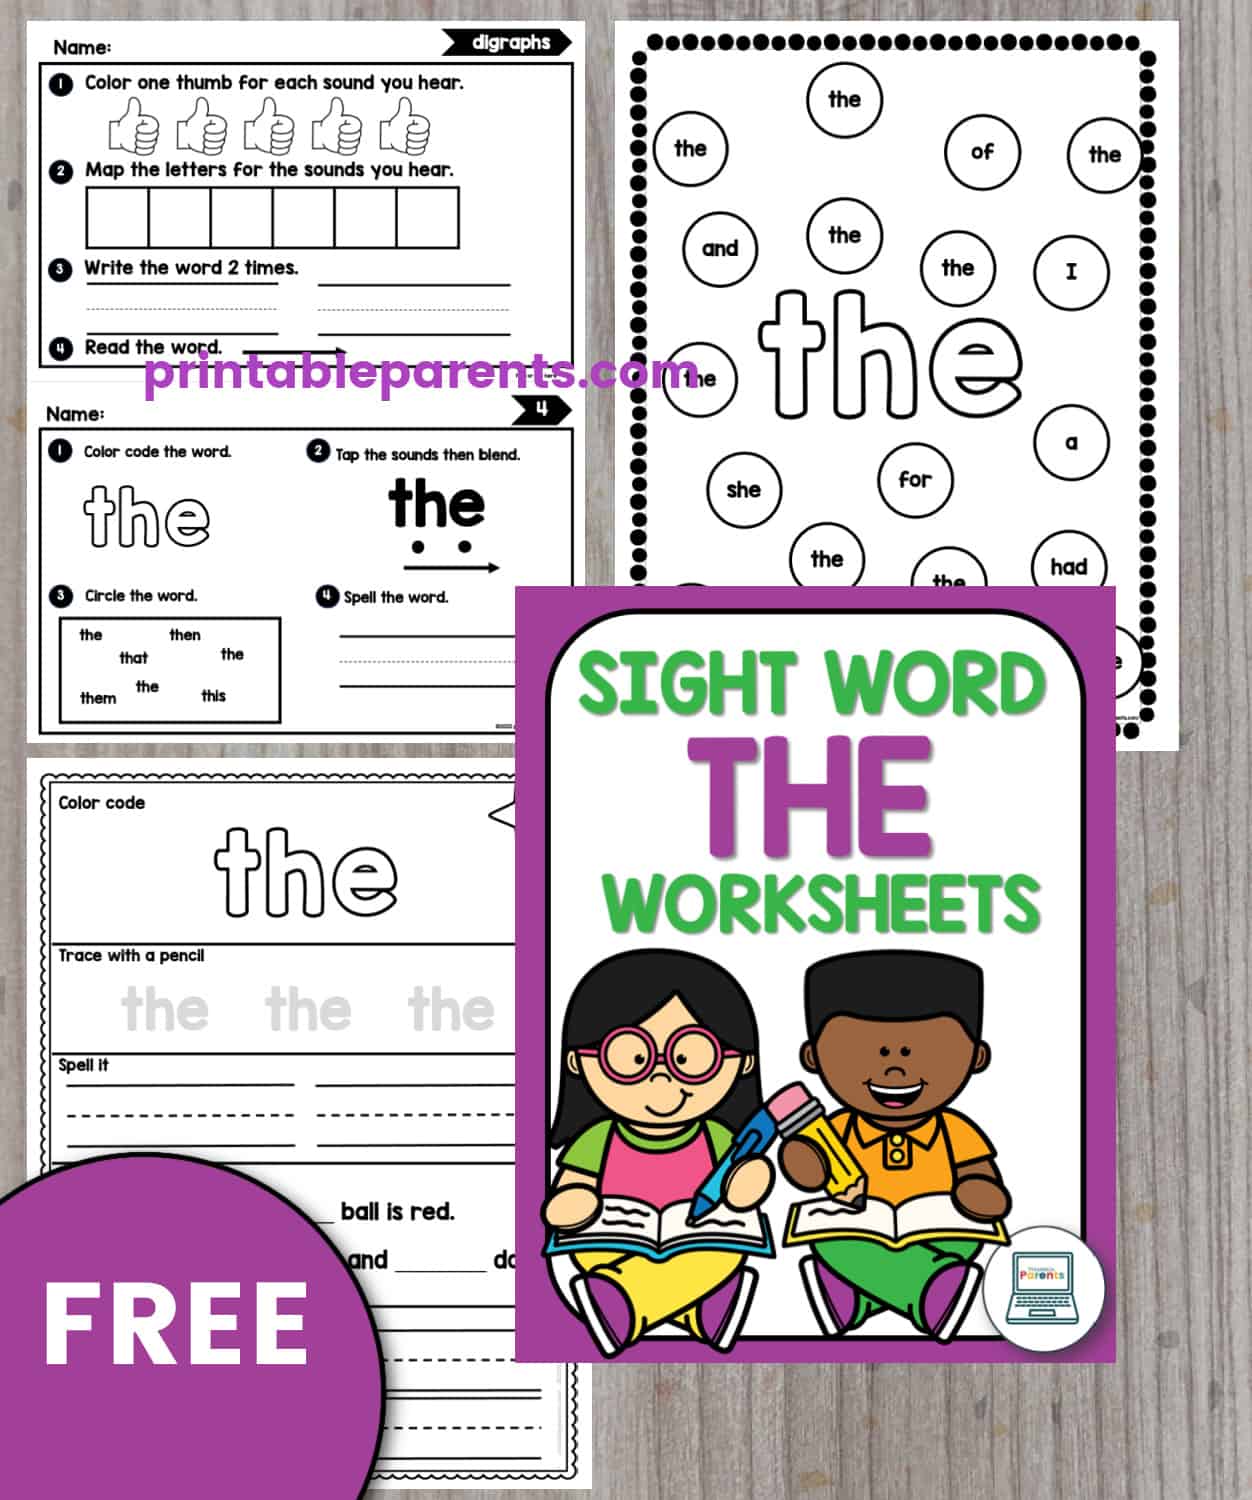 graphic reads sight word the worksheets and has three images of worksheets for the word the